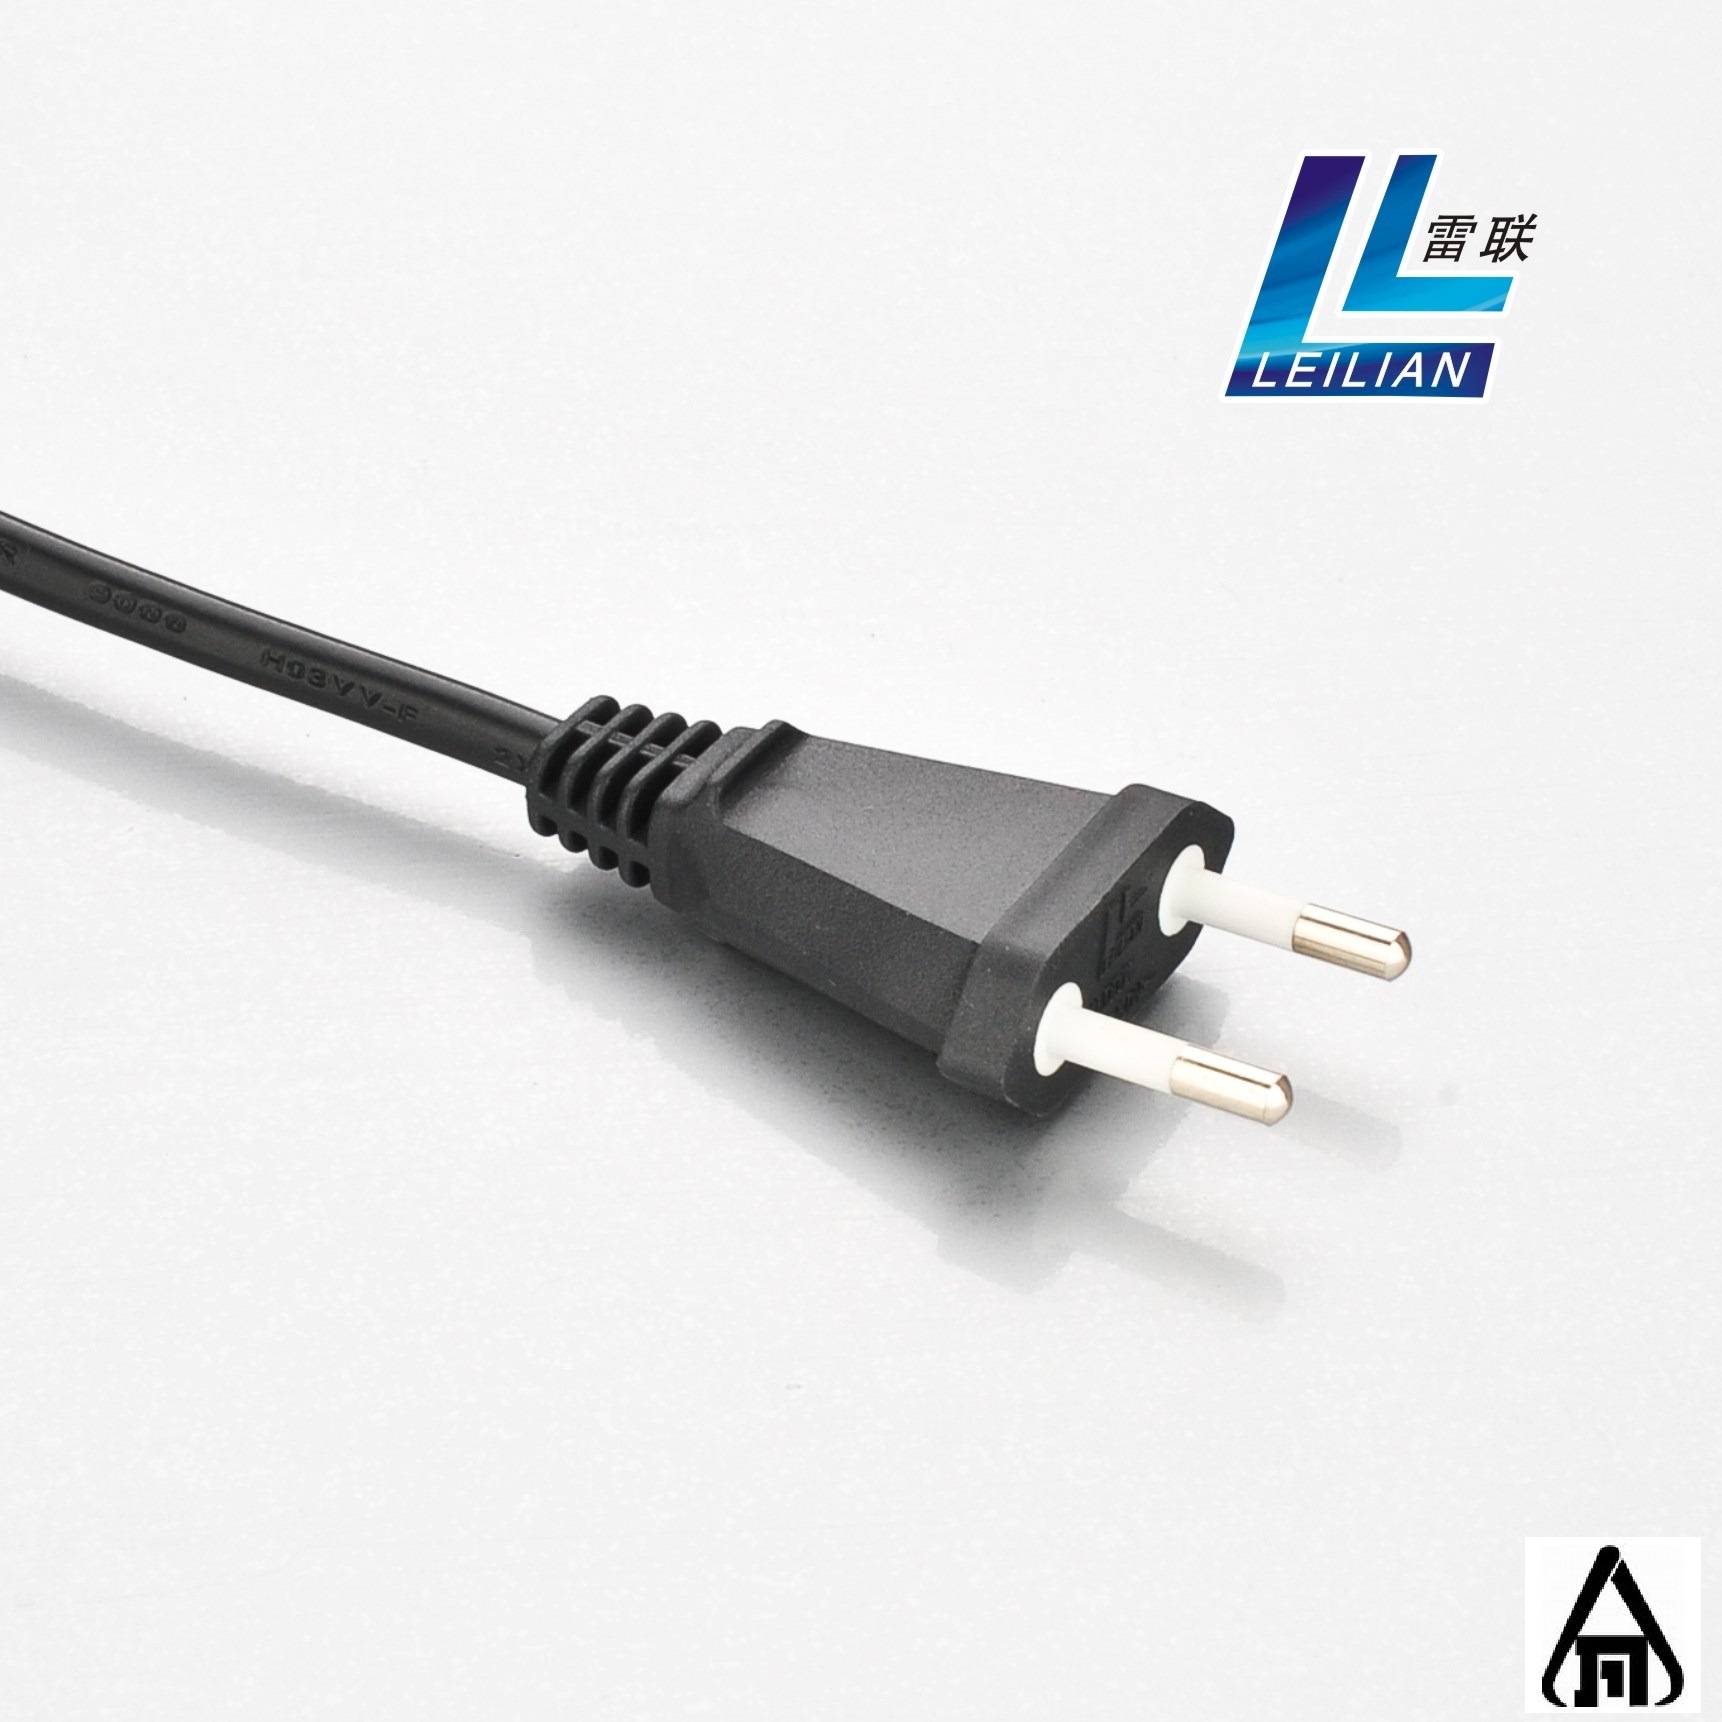 Israel Standard Power Cord with Sii Certificate